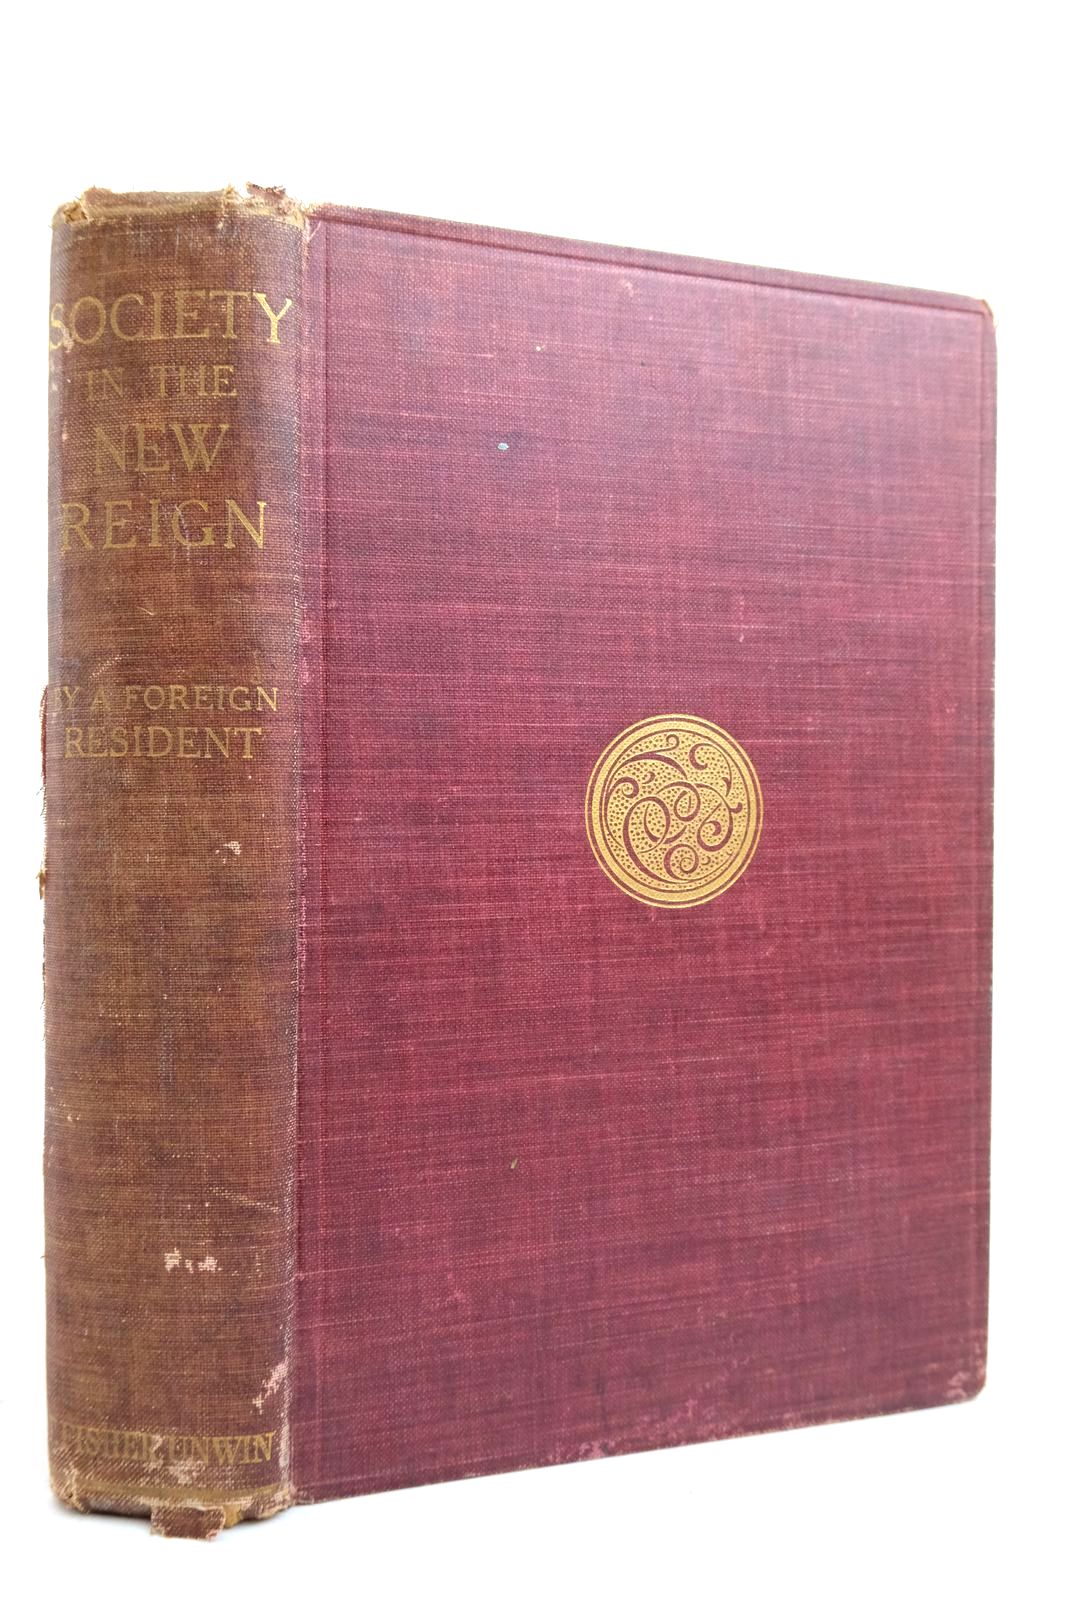 Photo of SOCIETY IN THE NEW REIGN- Stock Number: 2134951